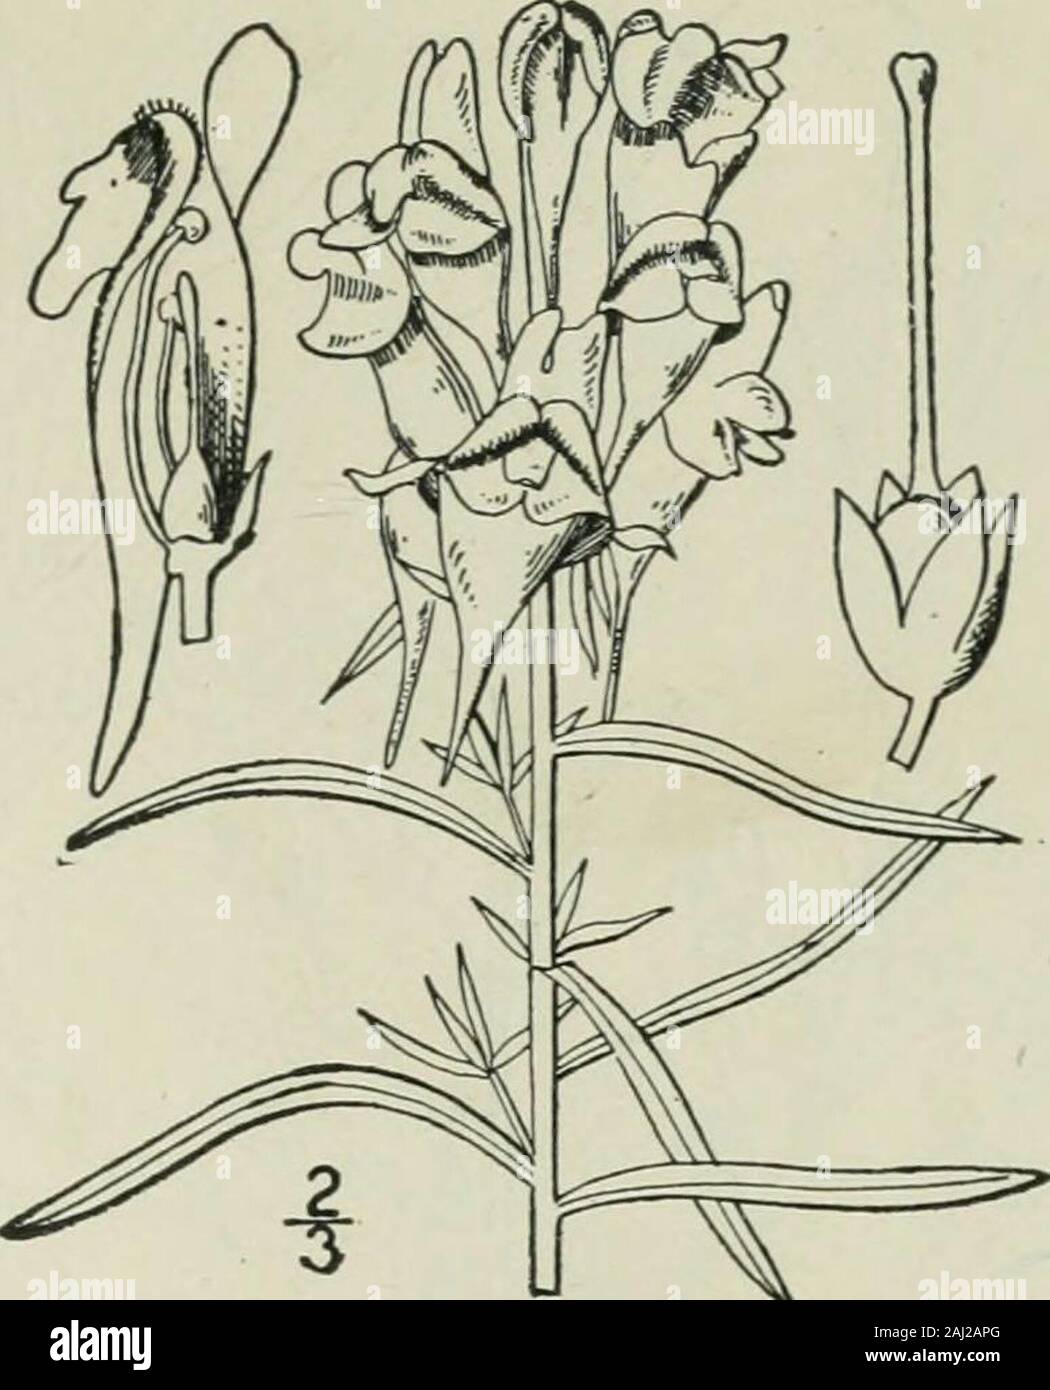 An illustrated flora of the northern United States, Canada and the British possessions : from Newfoundland to the parallel of the southern boundary of Virginia and from the Atlantic Ocean westward to the 102nd meridian . xweed. ^ Eggs and bacon. Yellow toad-flax. Impudent lawyer. Jacobs-ladder. Rancid. Wild flax or tobacco. Devils flax. Snap-dragon. Devils- flower. Dead mens bones. Bread and butter. Continental weed. Gallwort. Rabbit-flower. Widely distributed in temperate regions as a weed. Linaria genistaefolia (L.) Mill., found many years ago at thenorthern part of New York Island, and admi Stock Photo